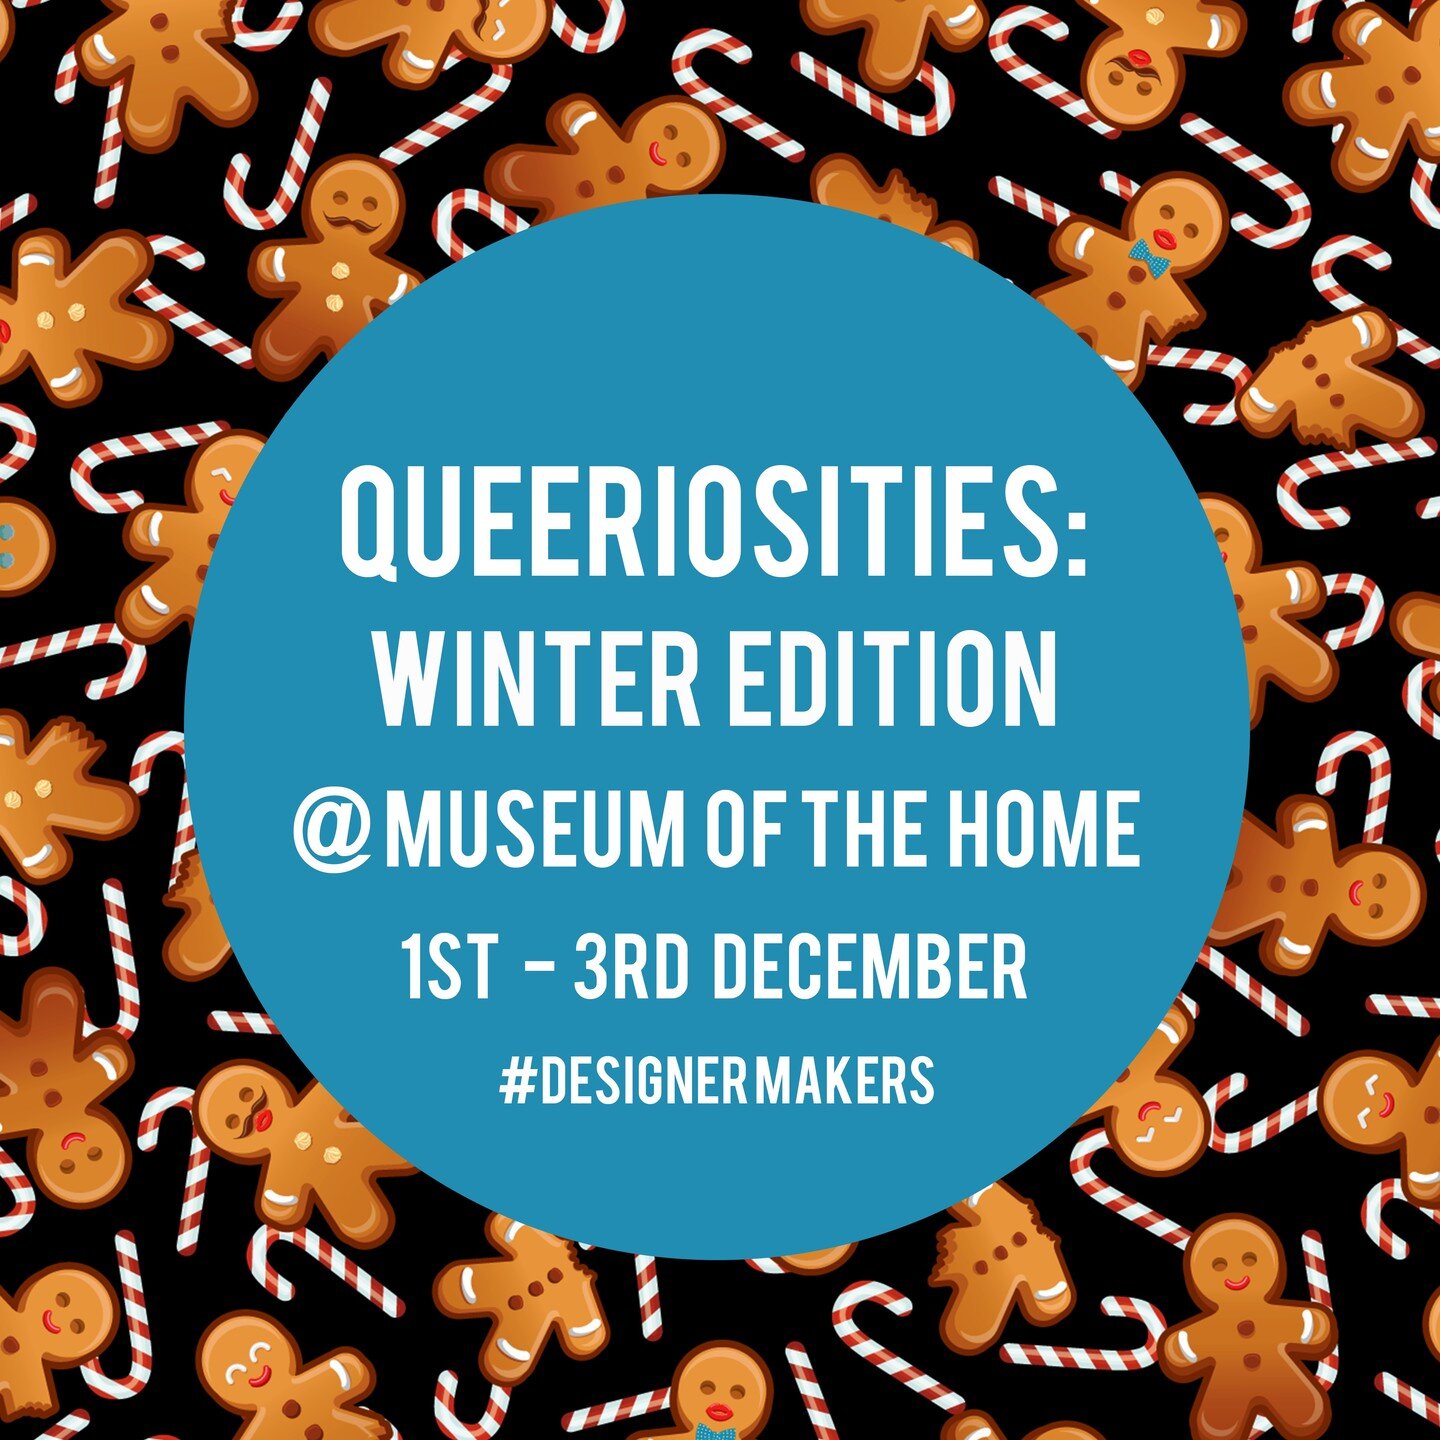 FROM TOMORROW, PALS! Curated by uber-legend @davypittoors ... you're not going to want to miss this!

Posted @withregram &bull; @queeriosities_ 

Queeriosities (Art and Makers Fair)
Winter Edition &bull; 1 2 3 Dec @museumofthehome
&bull;
The Winter e